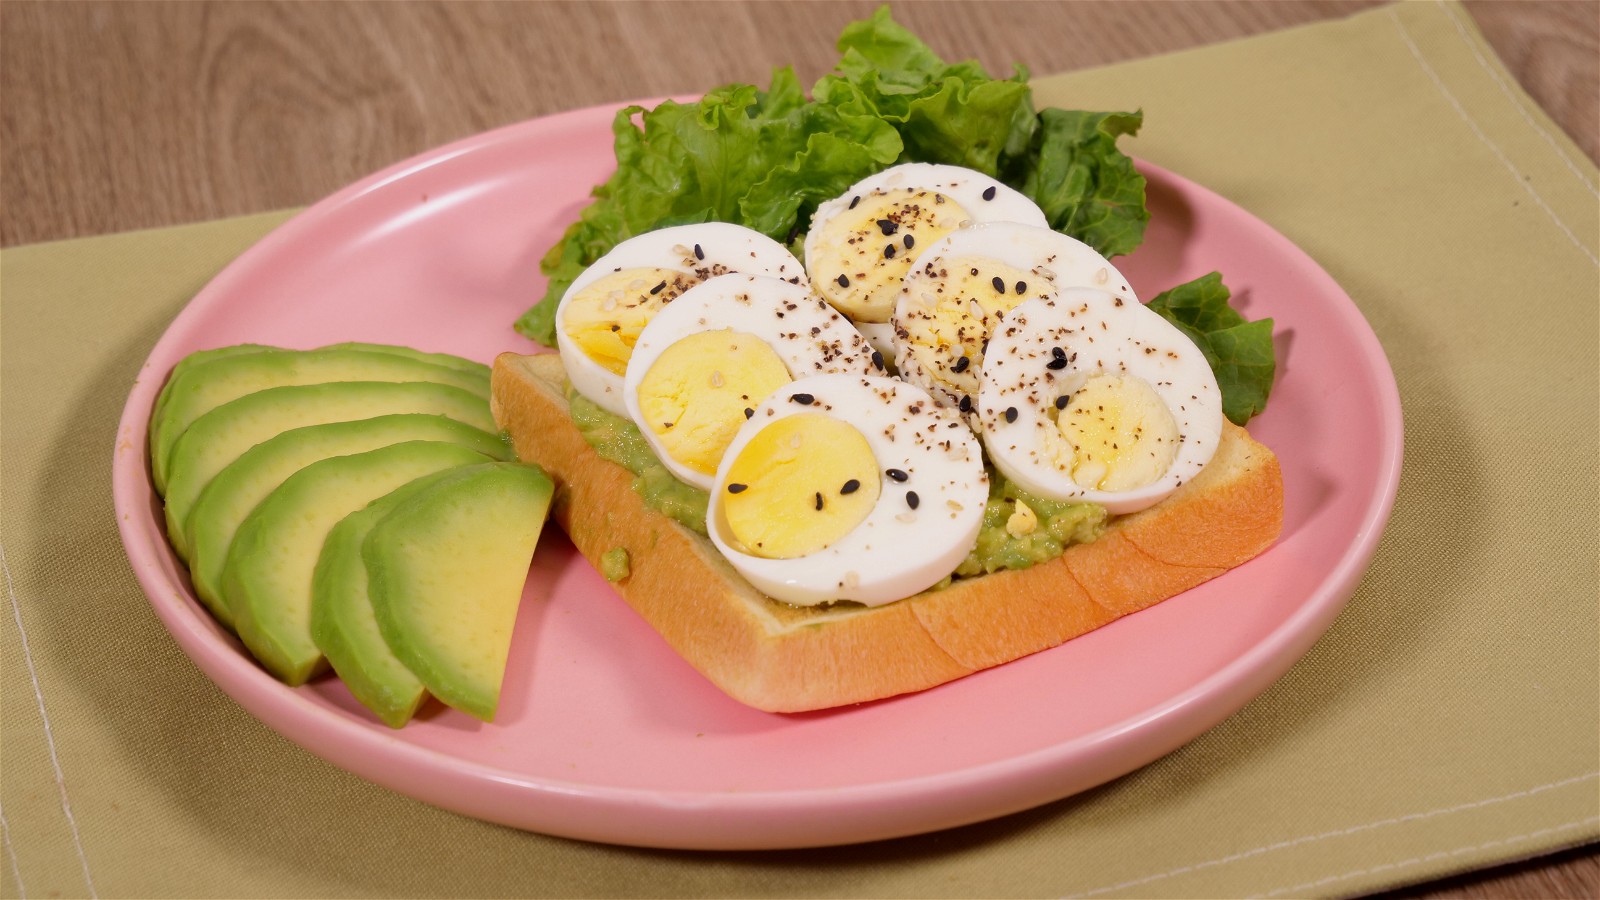 Image of Avocado Toast with Egg